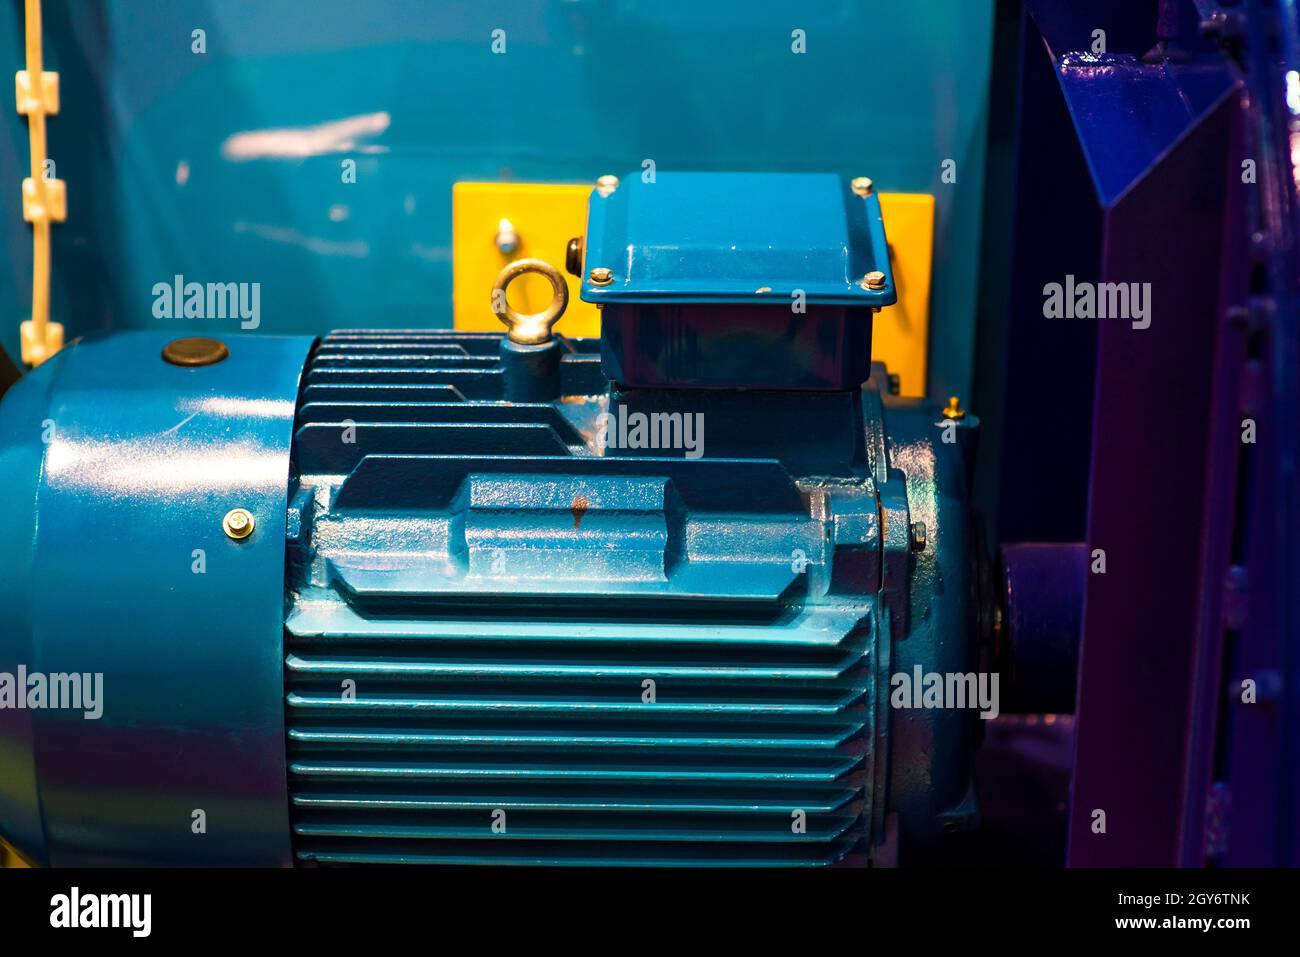 powerful 3 phase electric motor CMG for modern industrial equipment Stock  Photo - Alamy